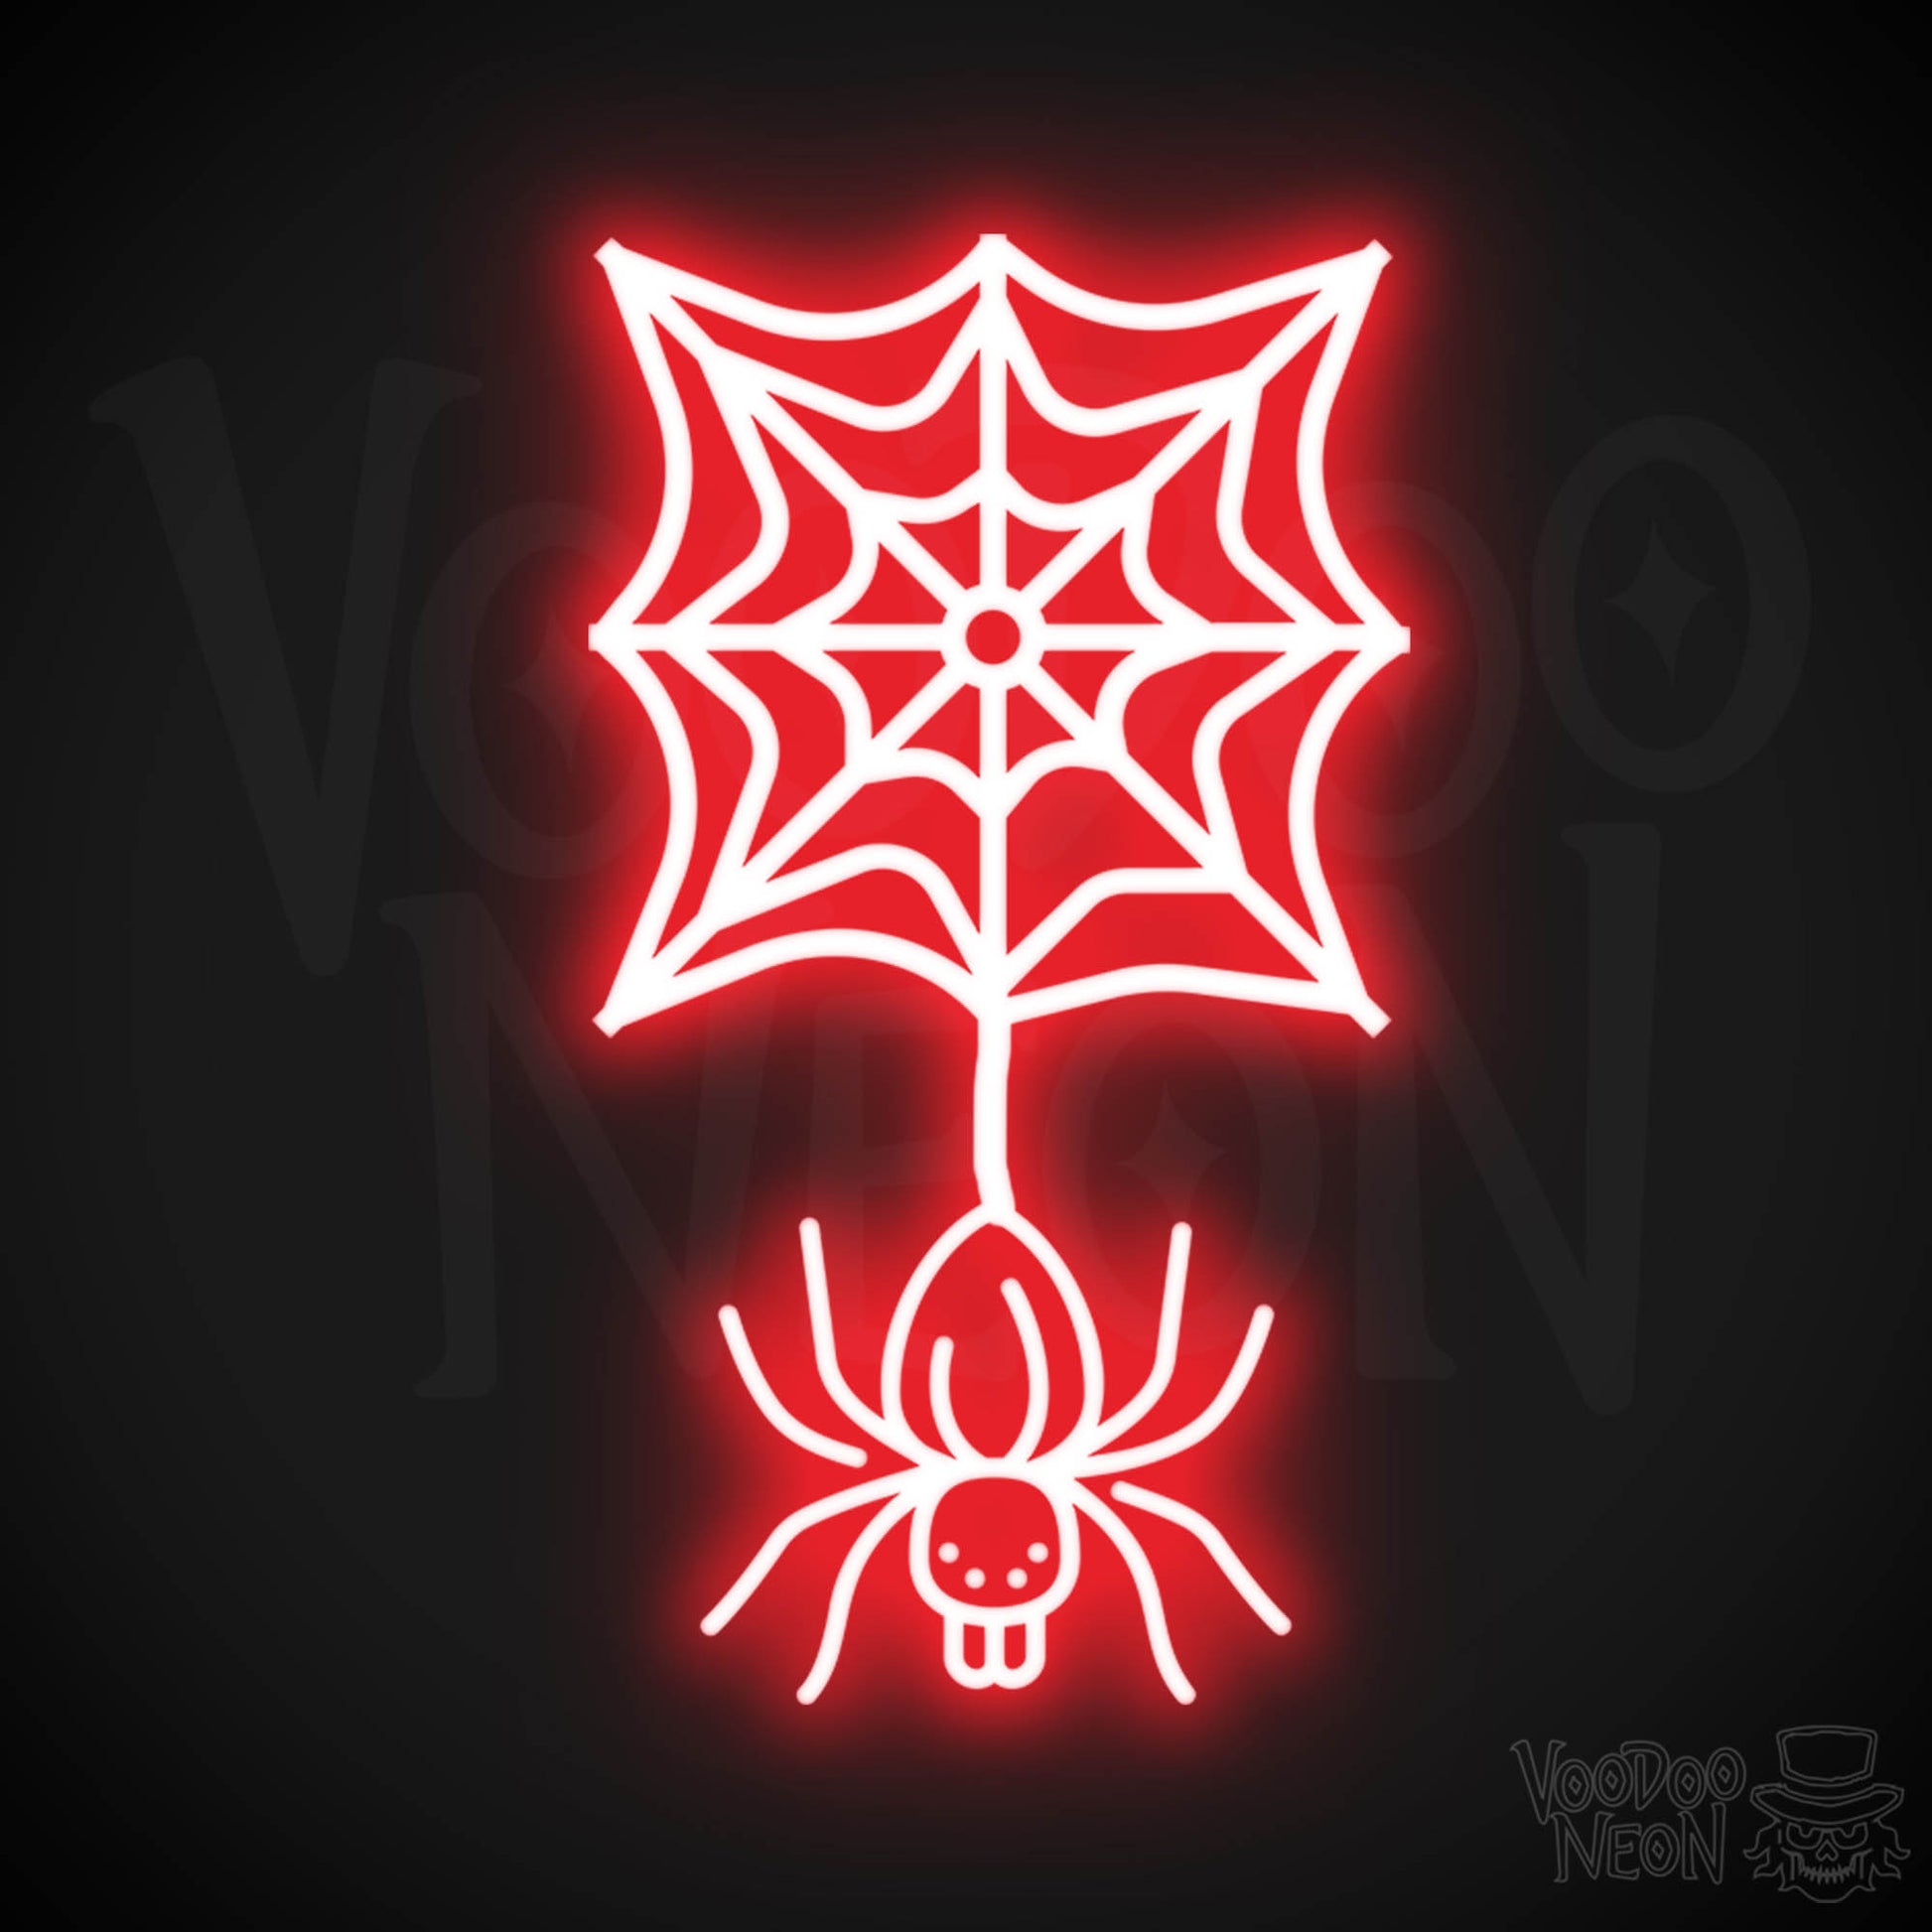 Neon Spider - Spider Neon Sign - Halloween LED Neon Spider - Color Red